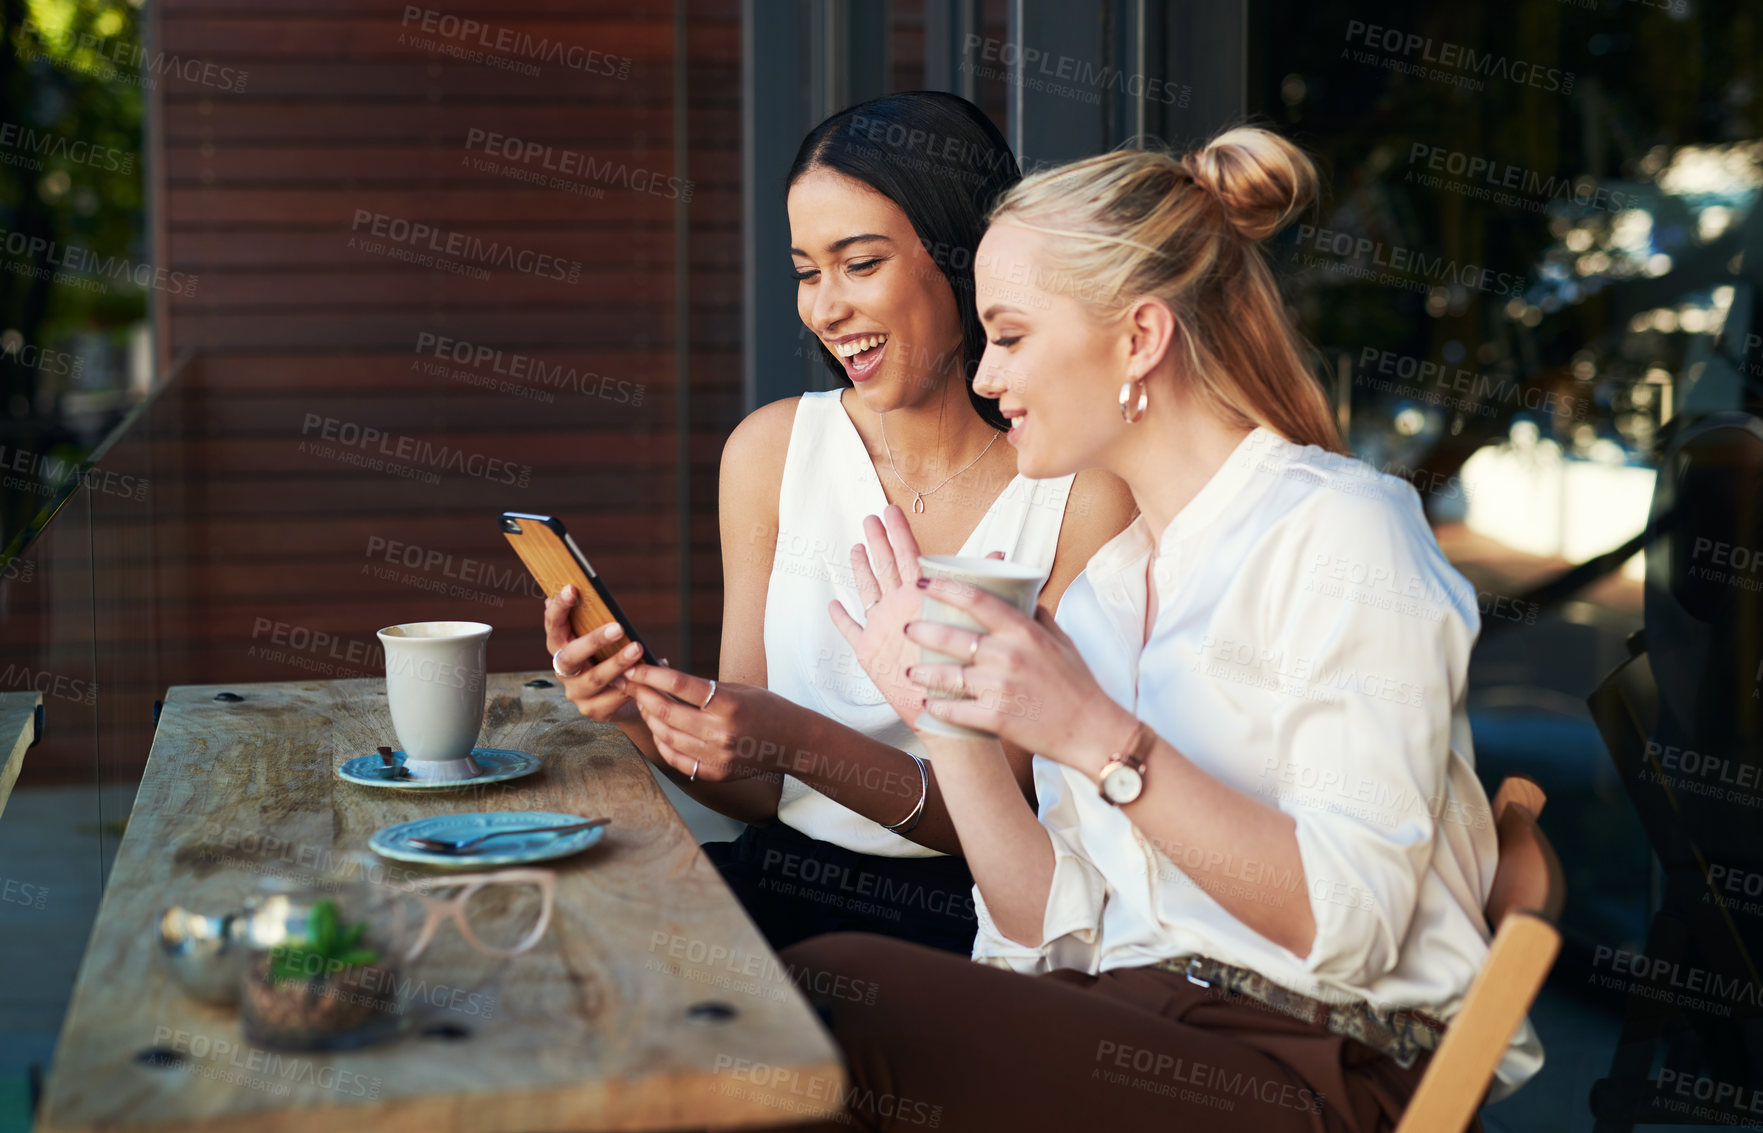 Buy stock photo Shot of two young women looking at something on a cellphone while sitting at a cafe